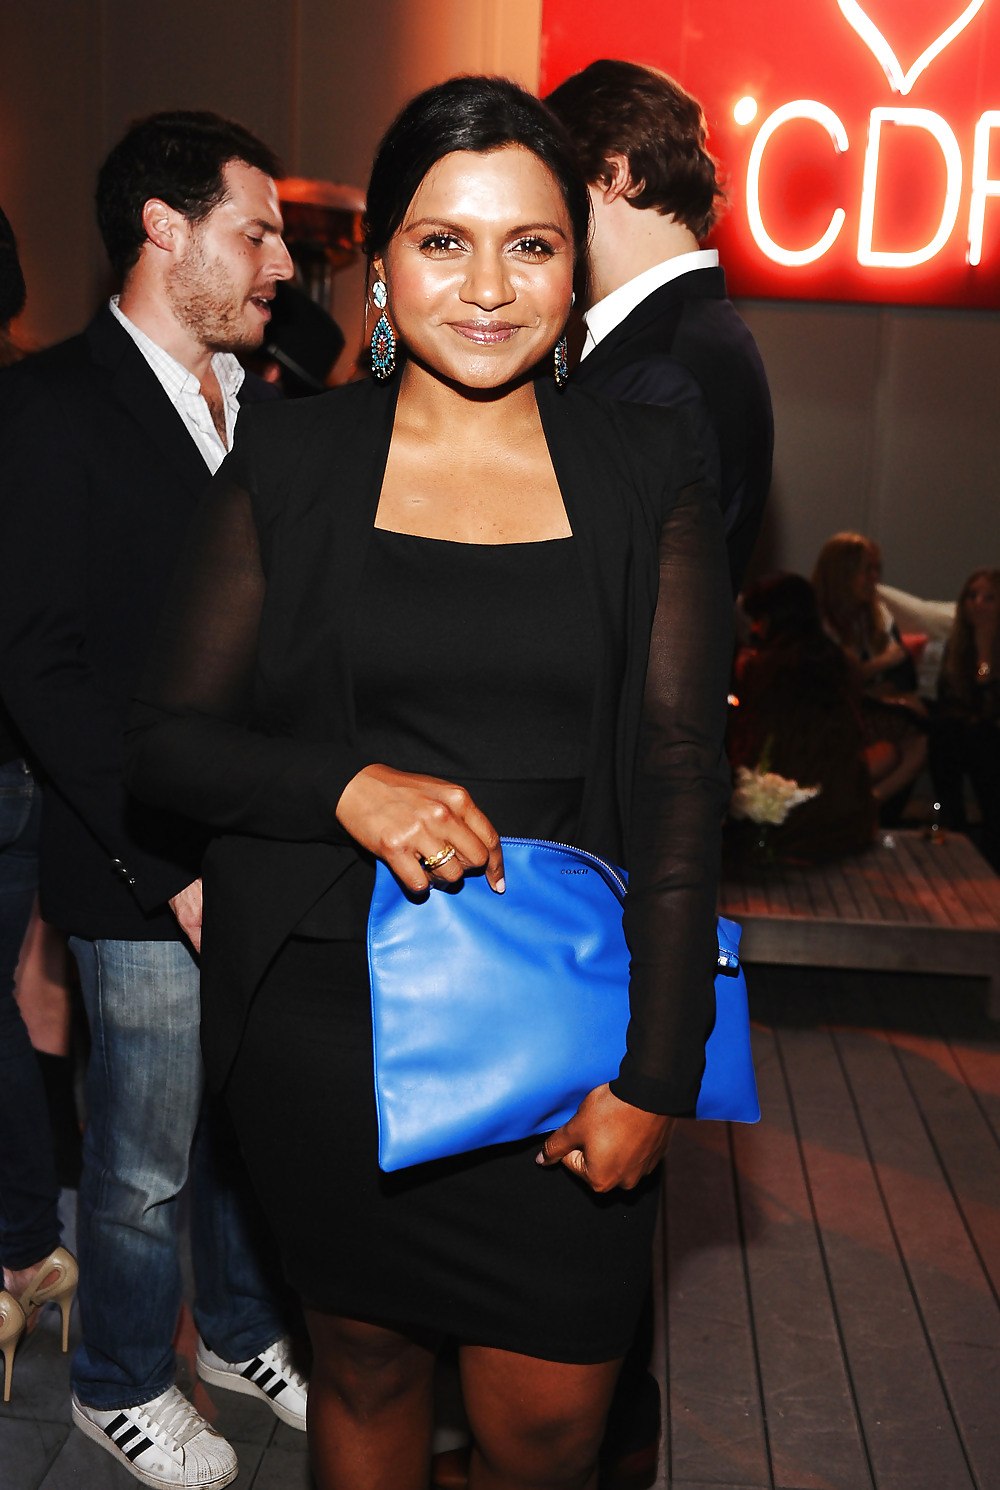 Hot Indian comedian Mindy Kaling - What would you do to her? #16250697